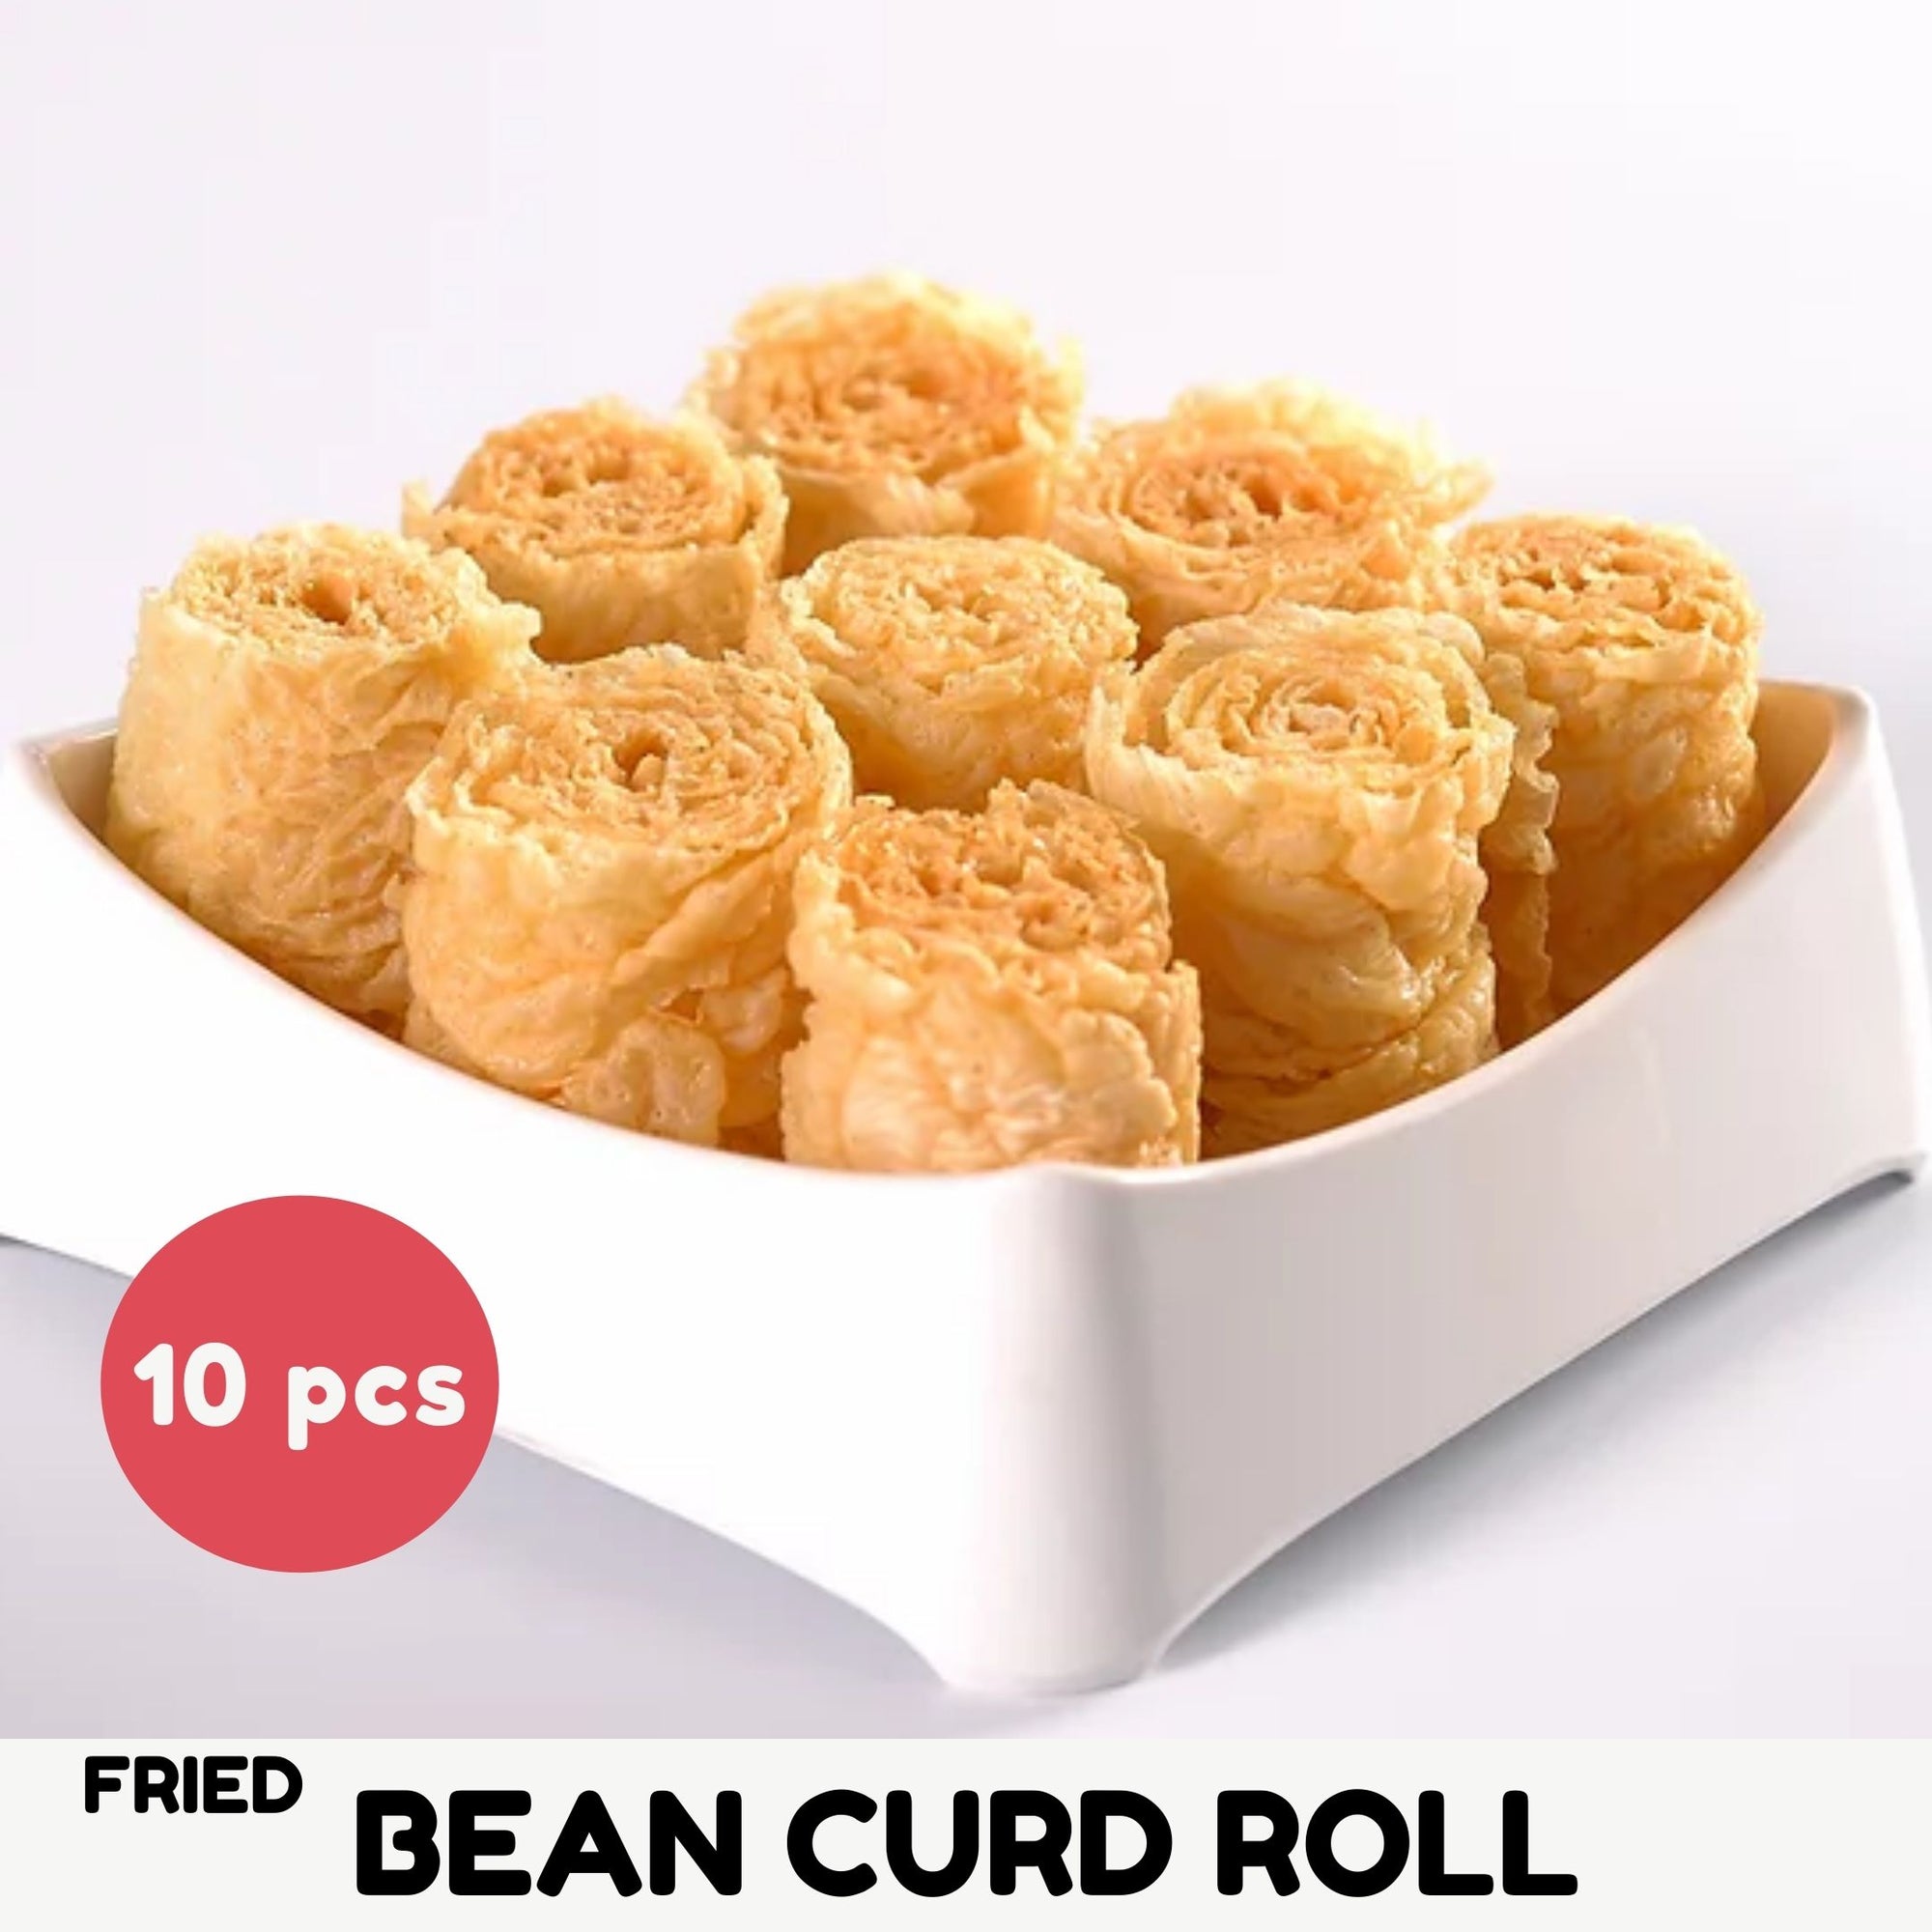 Fried Bean Curd Roll (Large)